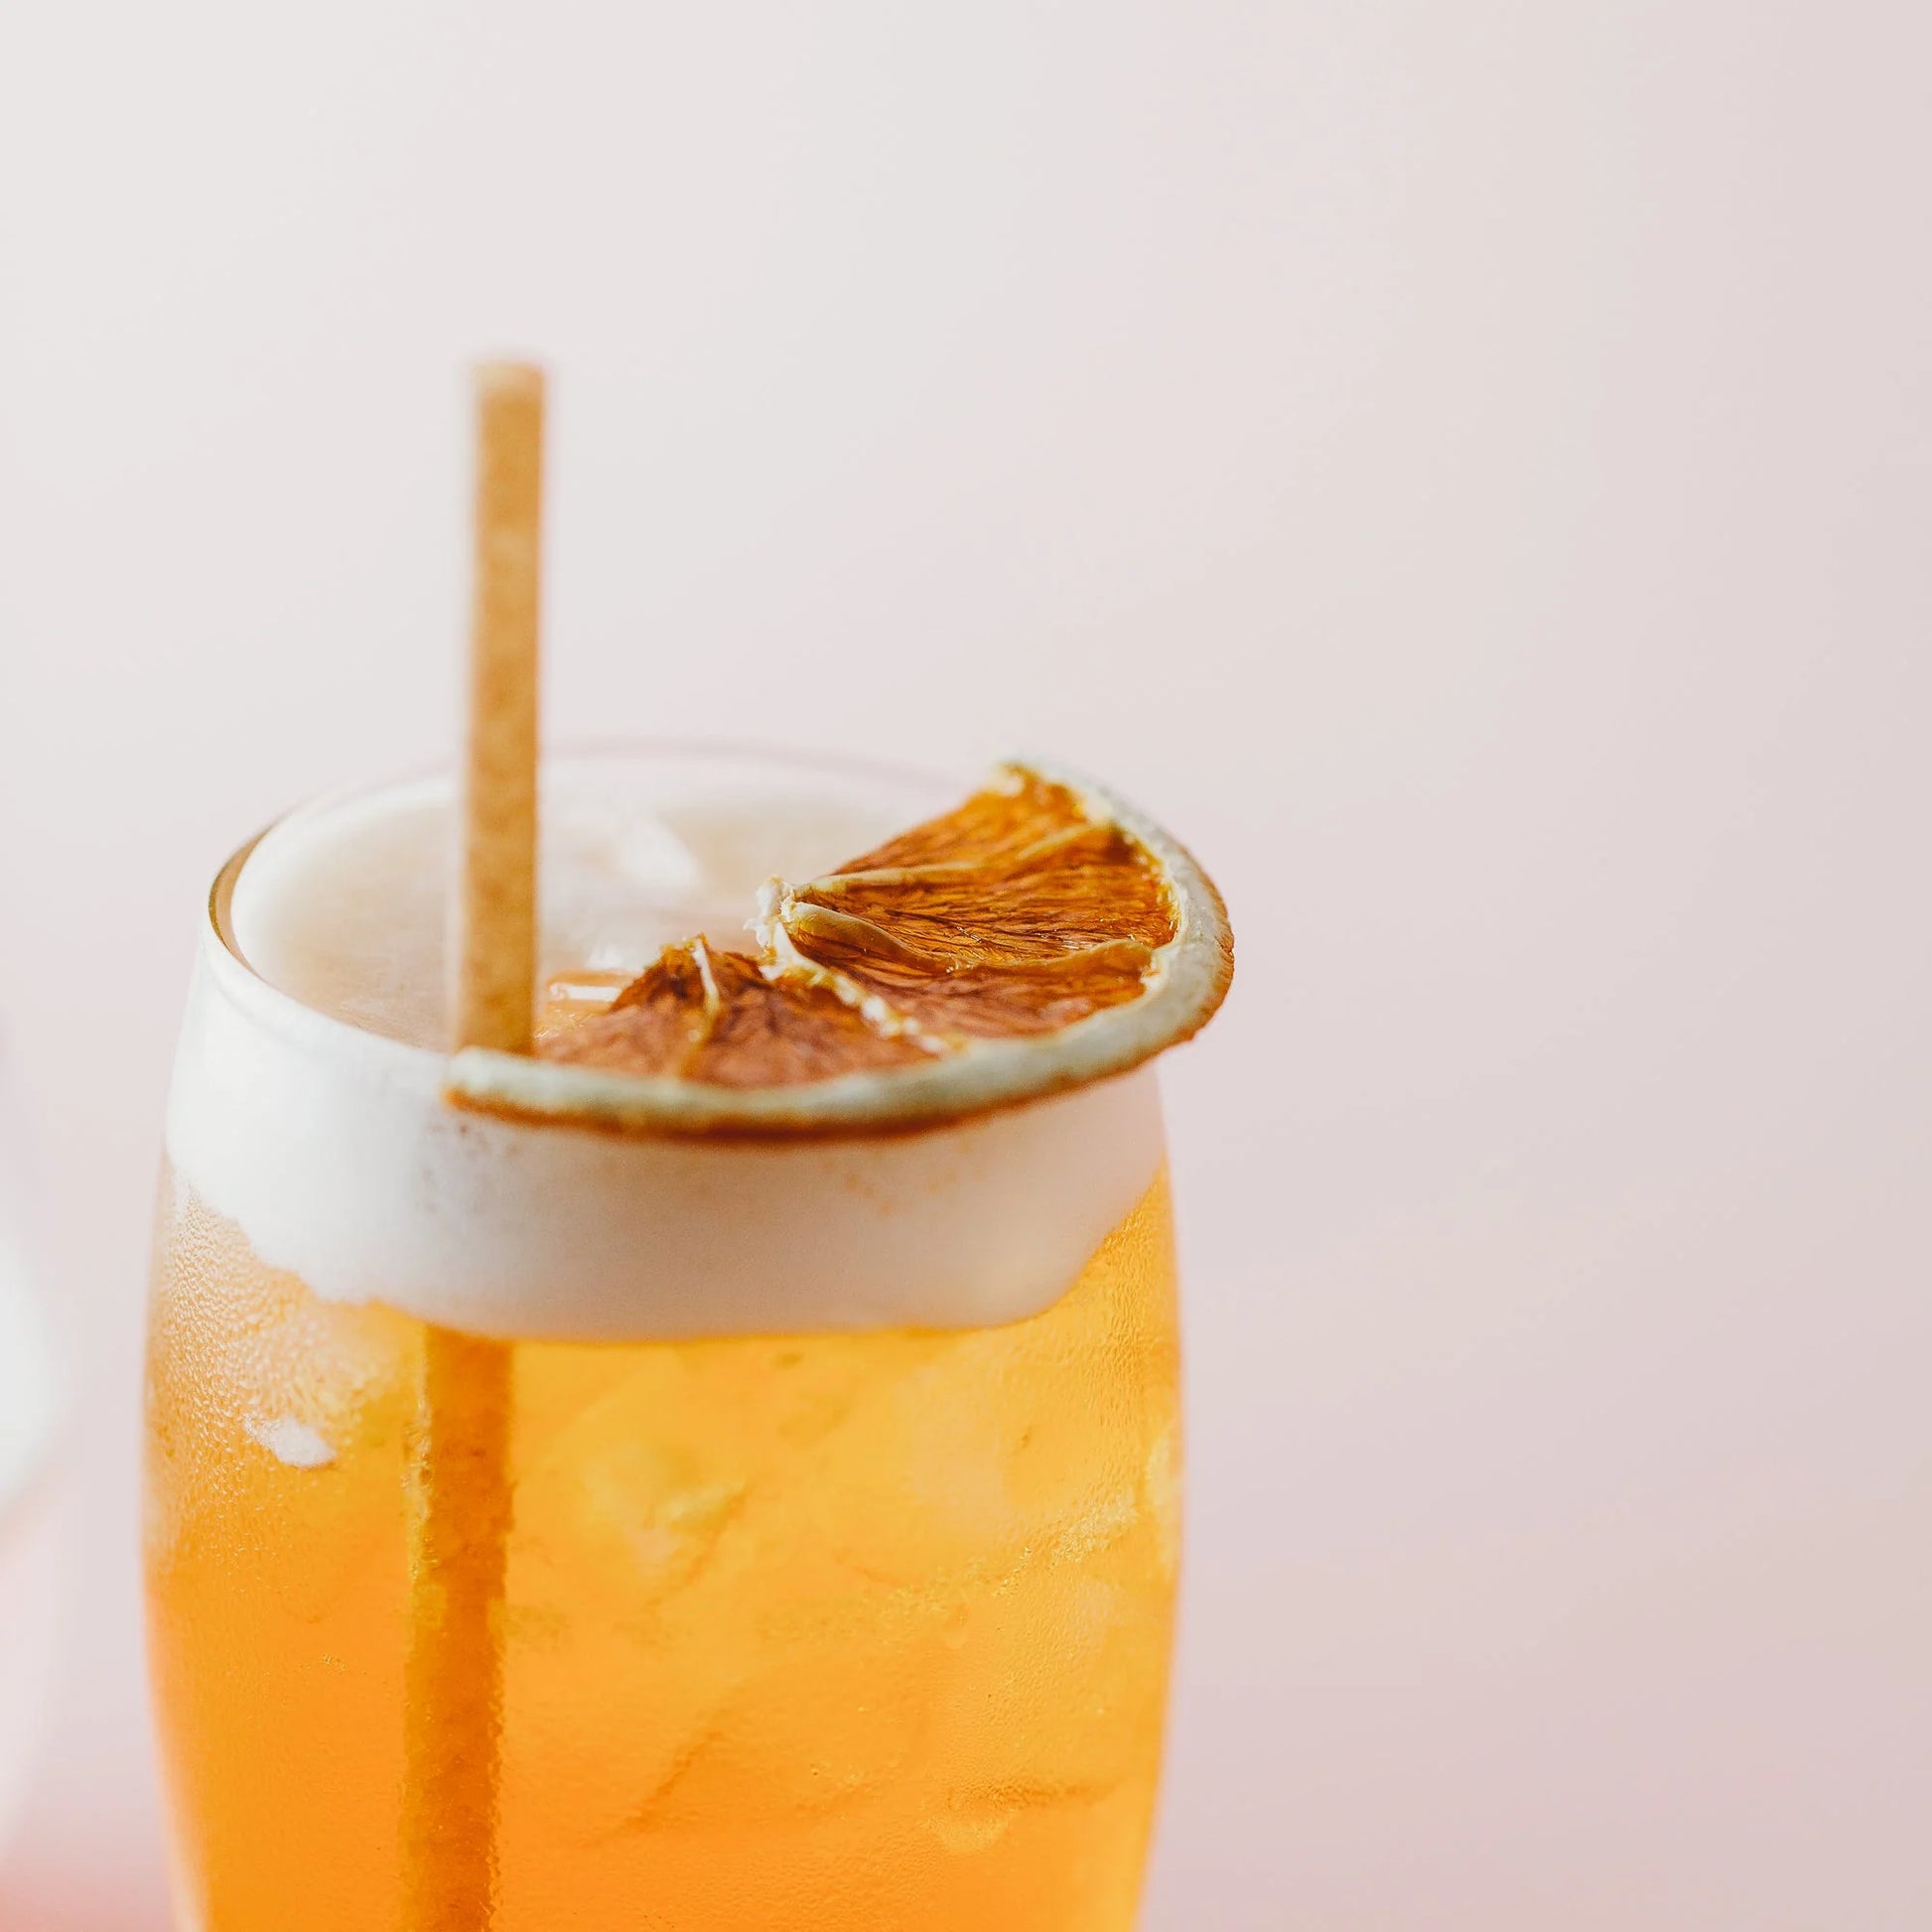 Make your favorite cocktails look and taste amazing with these 50g of dehydrated orange slices! Dried Orange Cocktail Garnishes in a jar adds a natural sweetness and accentuates the complexity of the drink. Slice into a Margarita, Old Fashioned, or Daiquiri to make a show-stopping drink! (You'll be the talk of the town.)